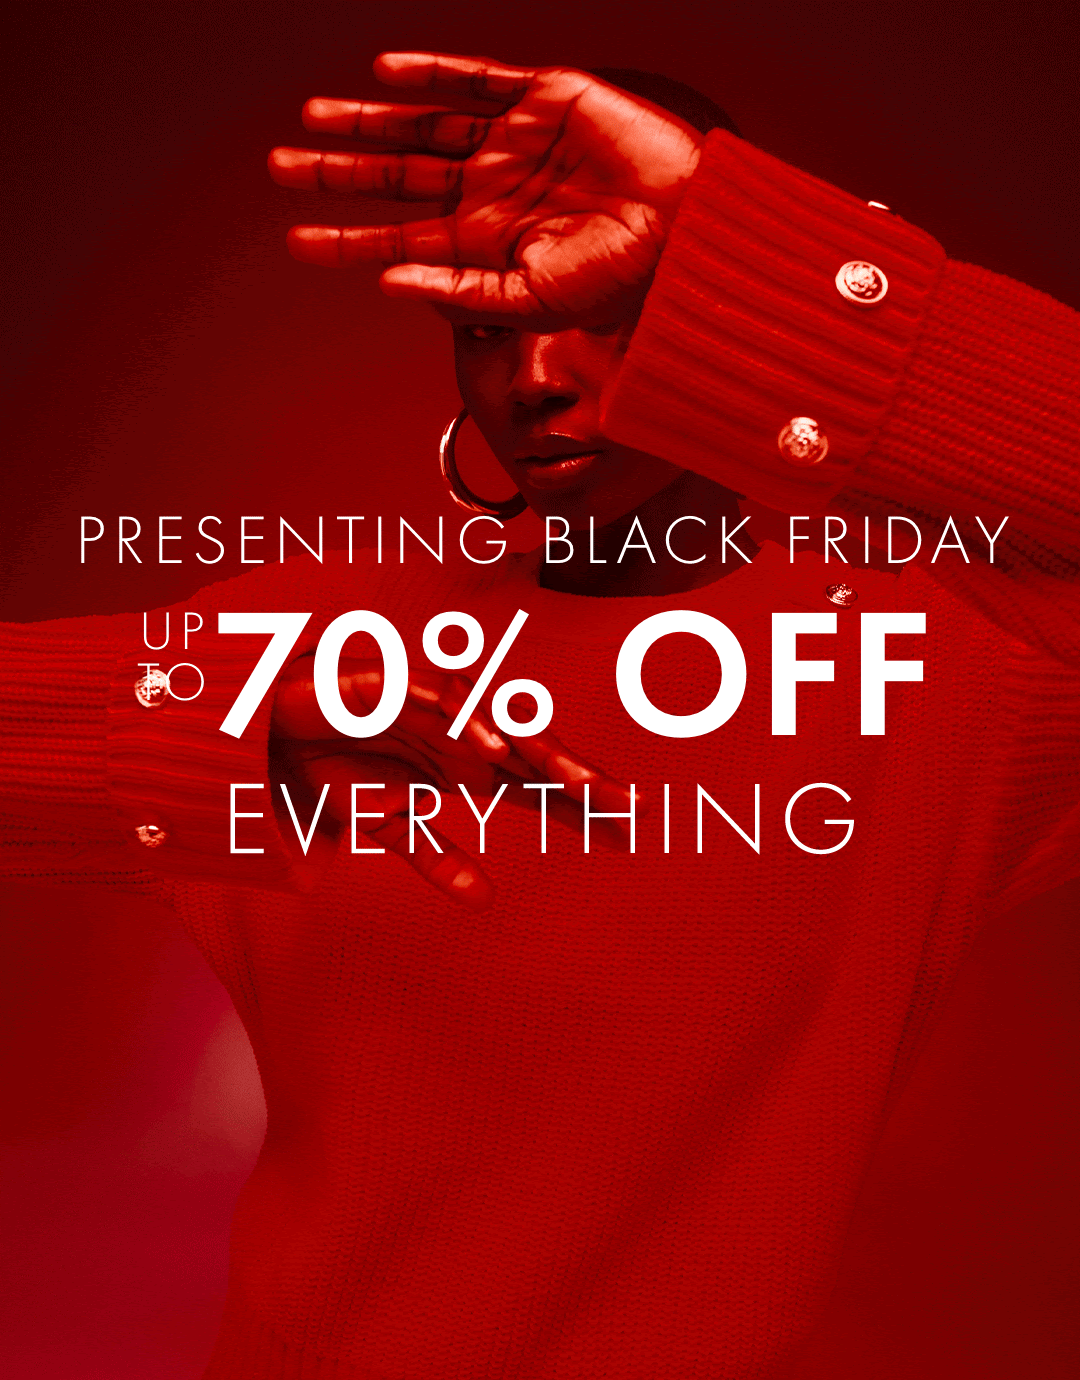 PRESENTING BLACK FRIDAY UP TO 70% OFF EVERYTHING